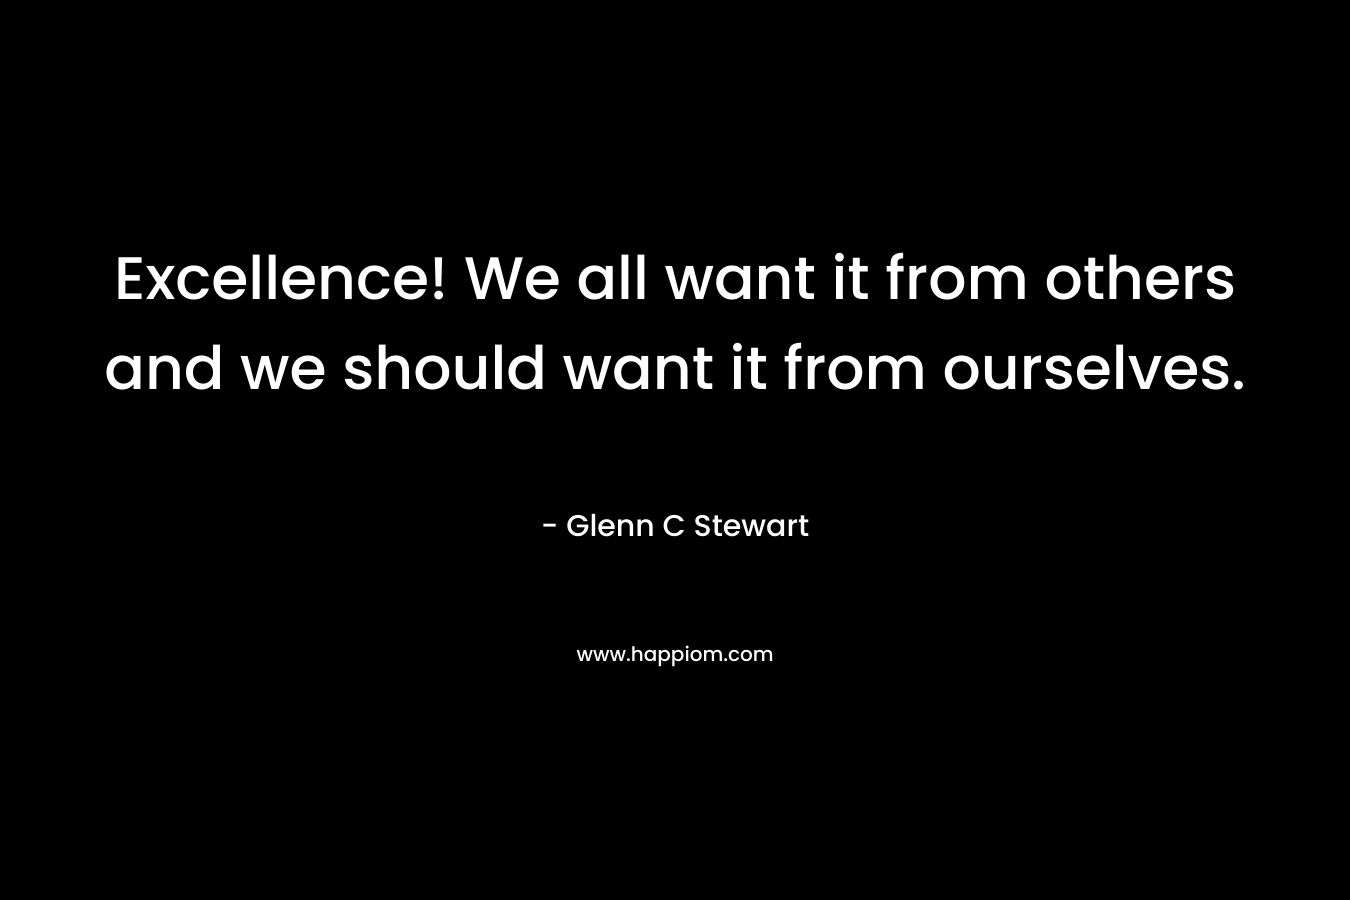 Excellence! We all want it from others and we should want it from ourselves.